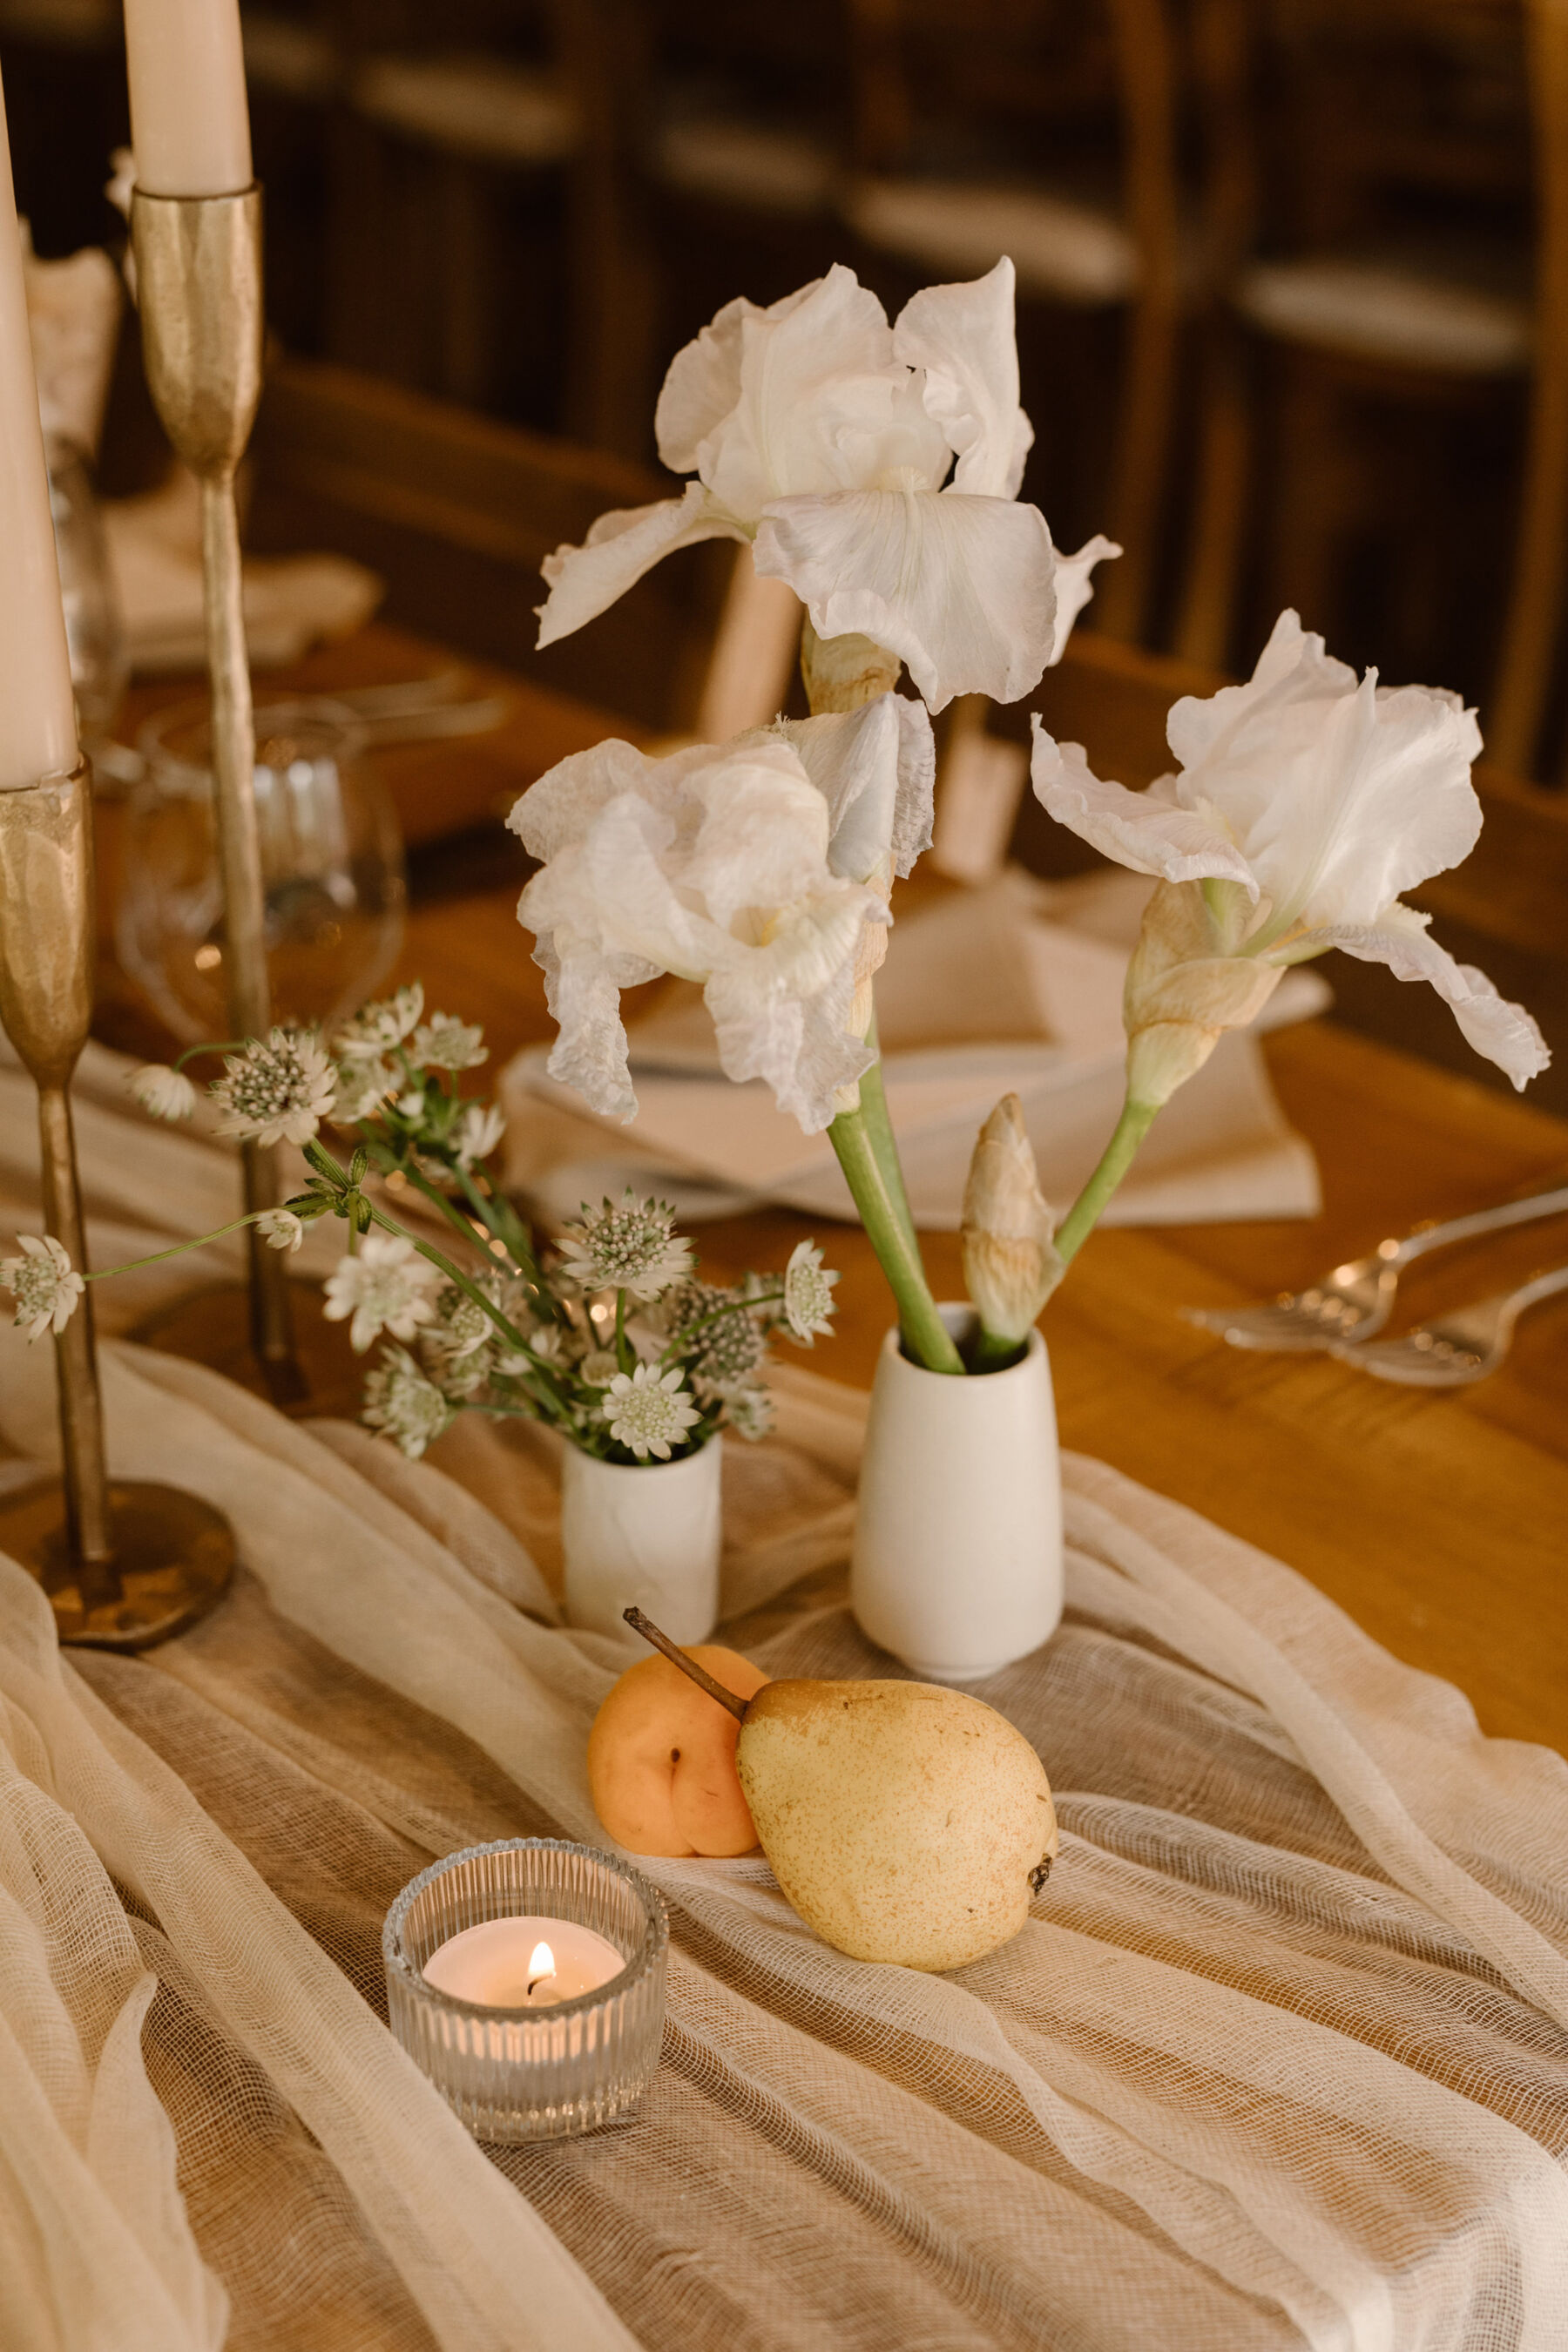 Simple wedding flowers and fruit as wedding table decor. Agnes Black Photography.